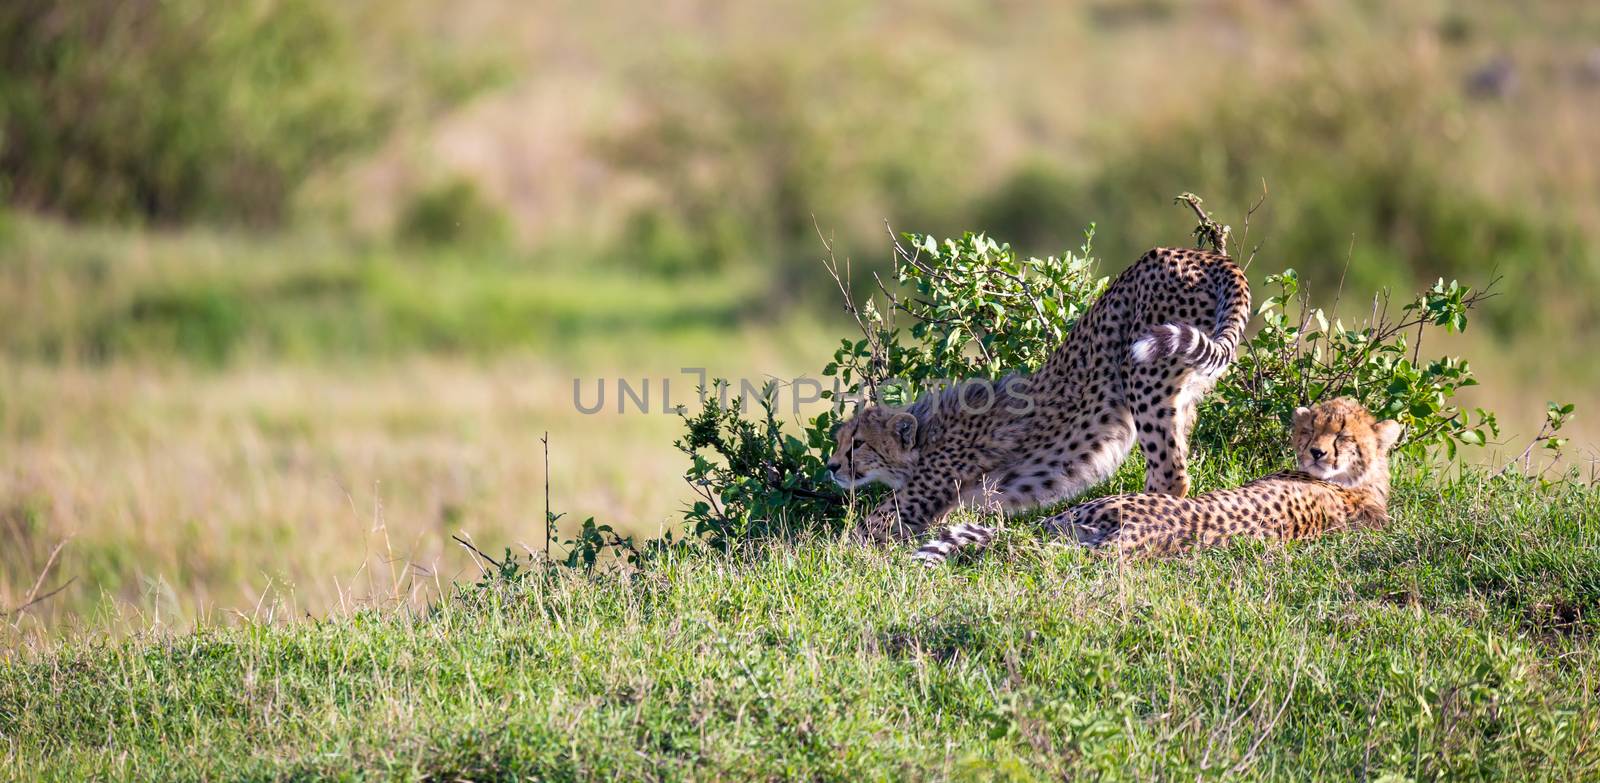 The cheetah mother with two children in the Kenyan savannah